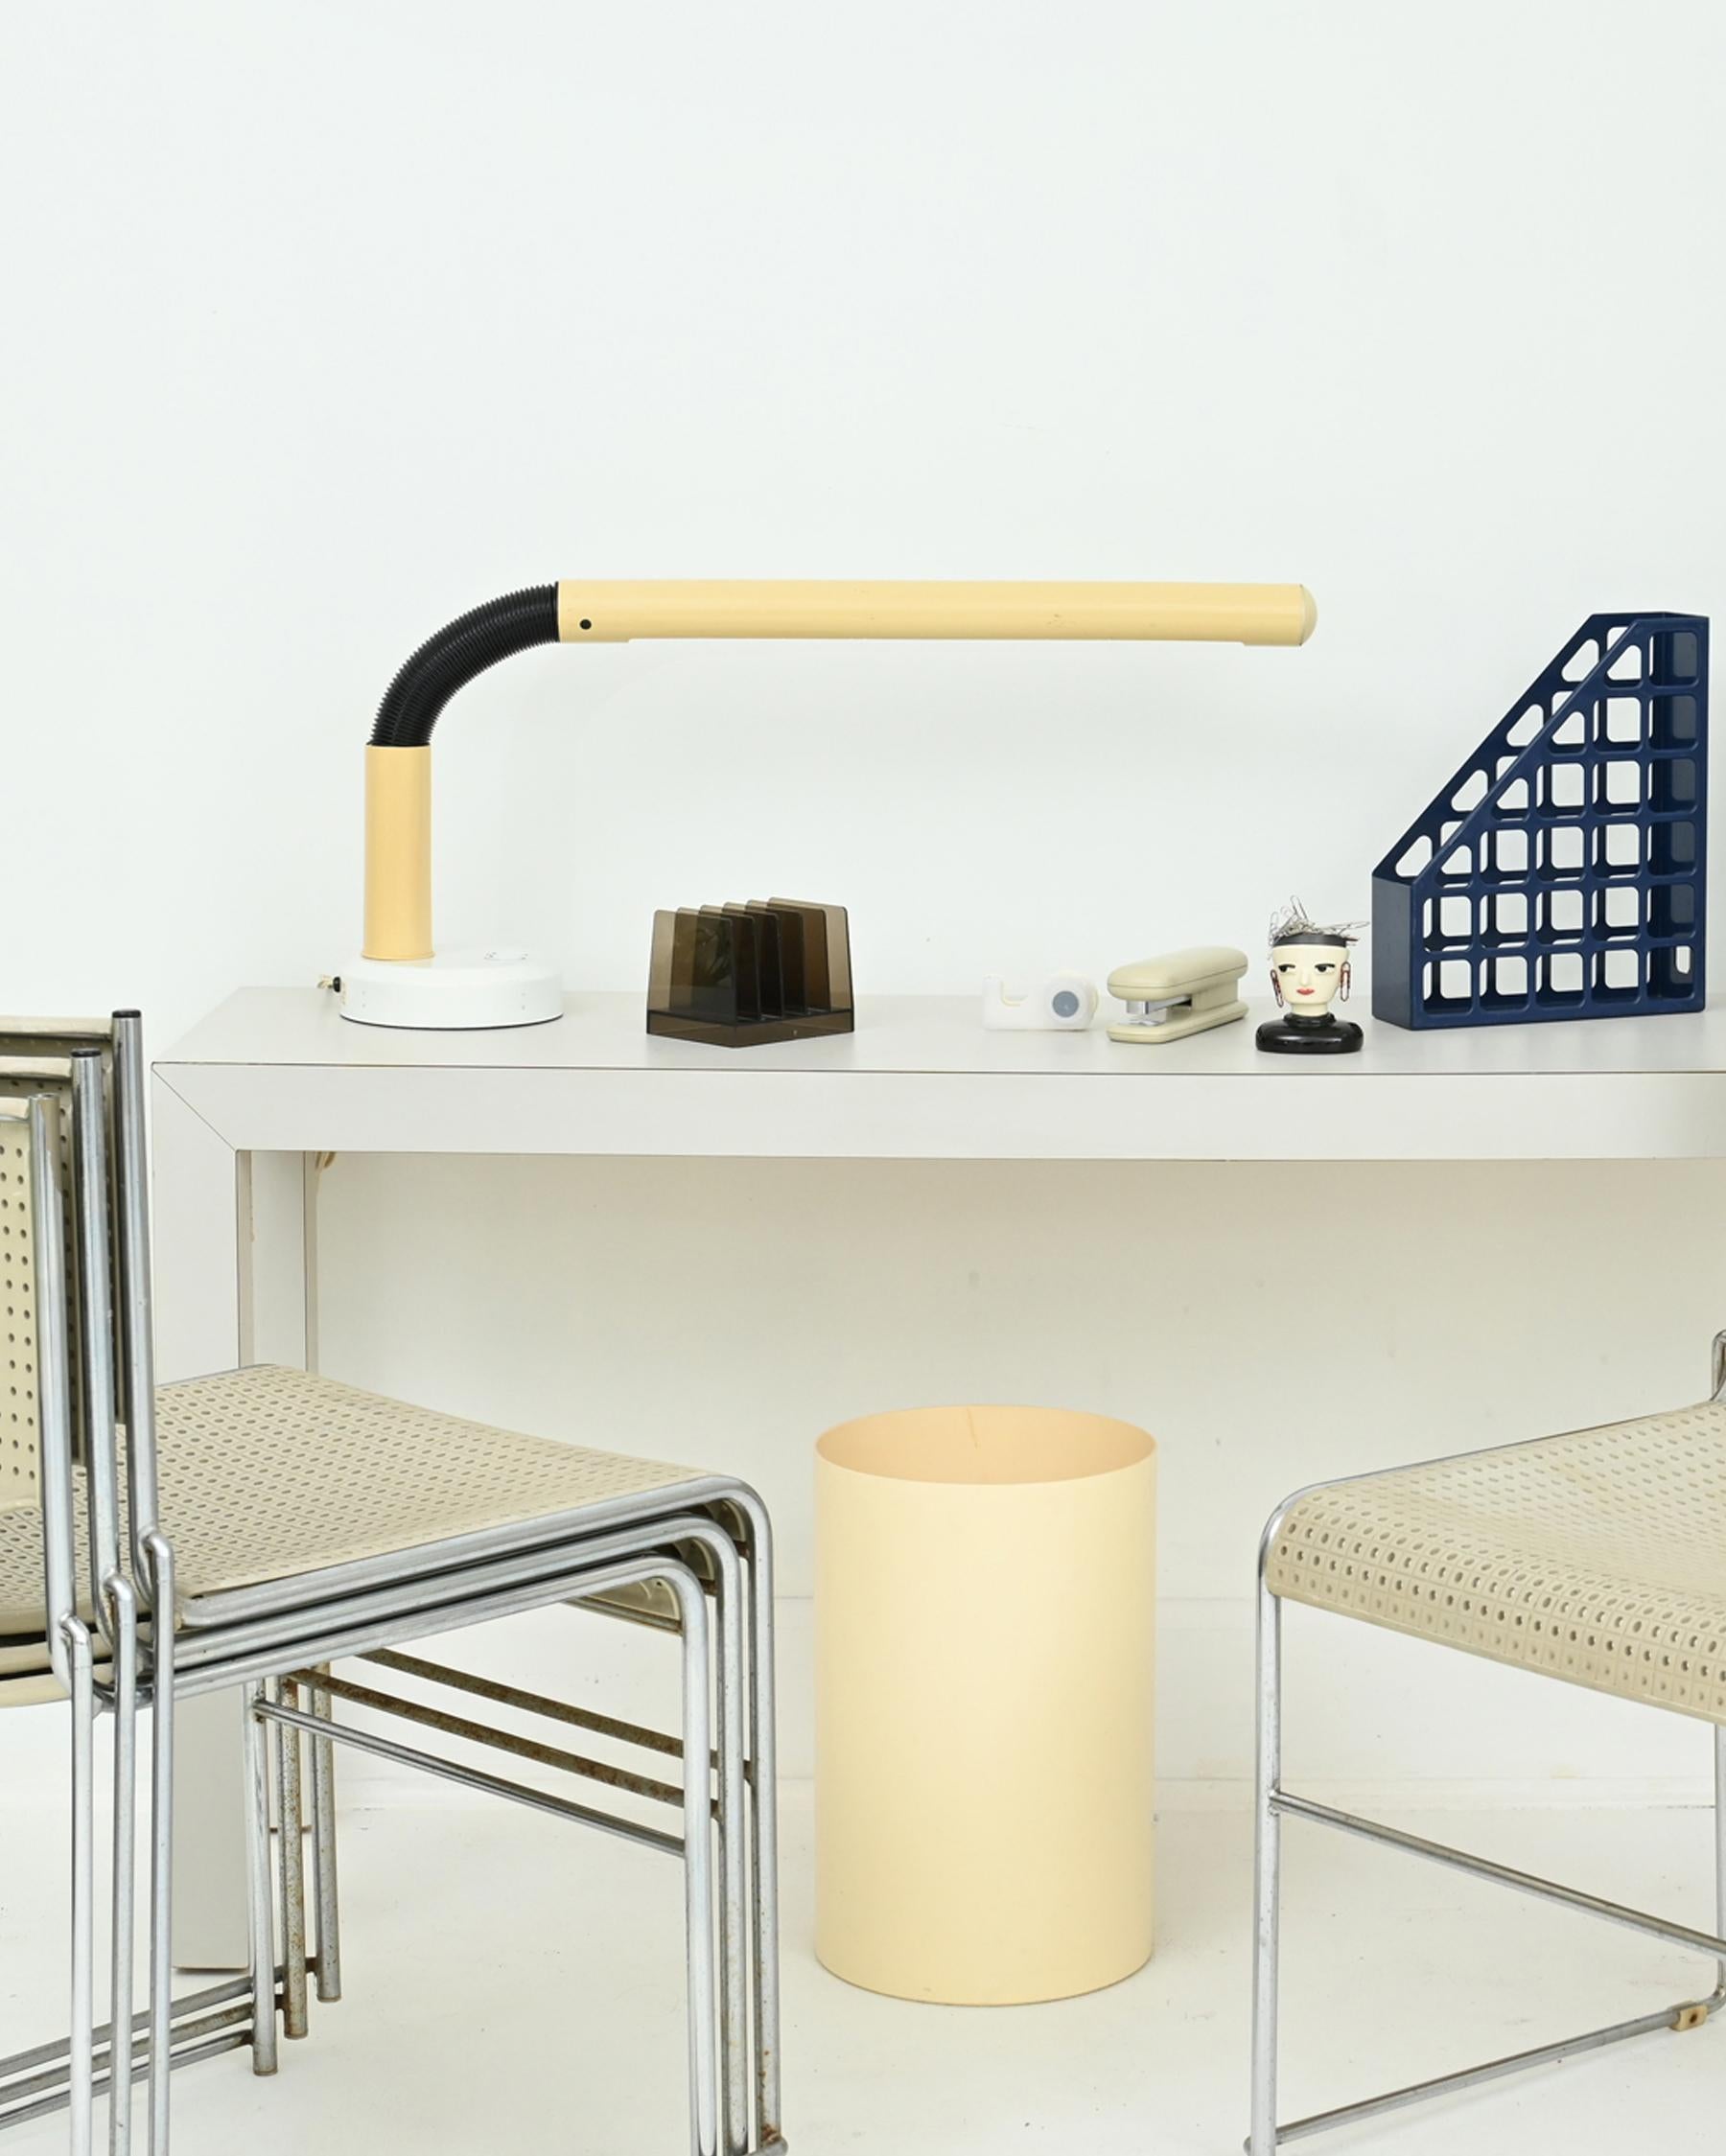 1970s Space Age Tubular Desk Lamp in the Style of Anders Pehrson’s “Tuben” 1